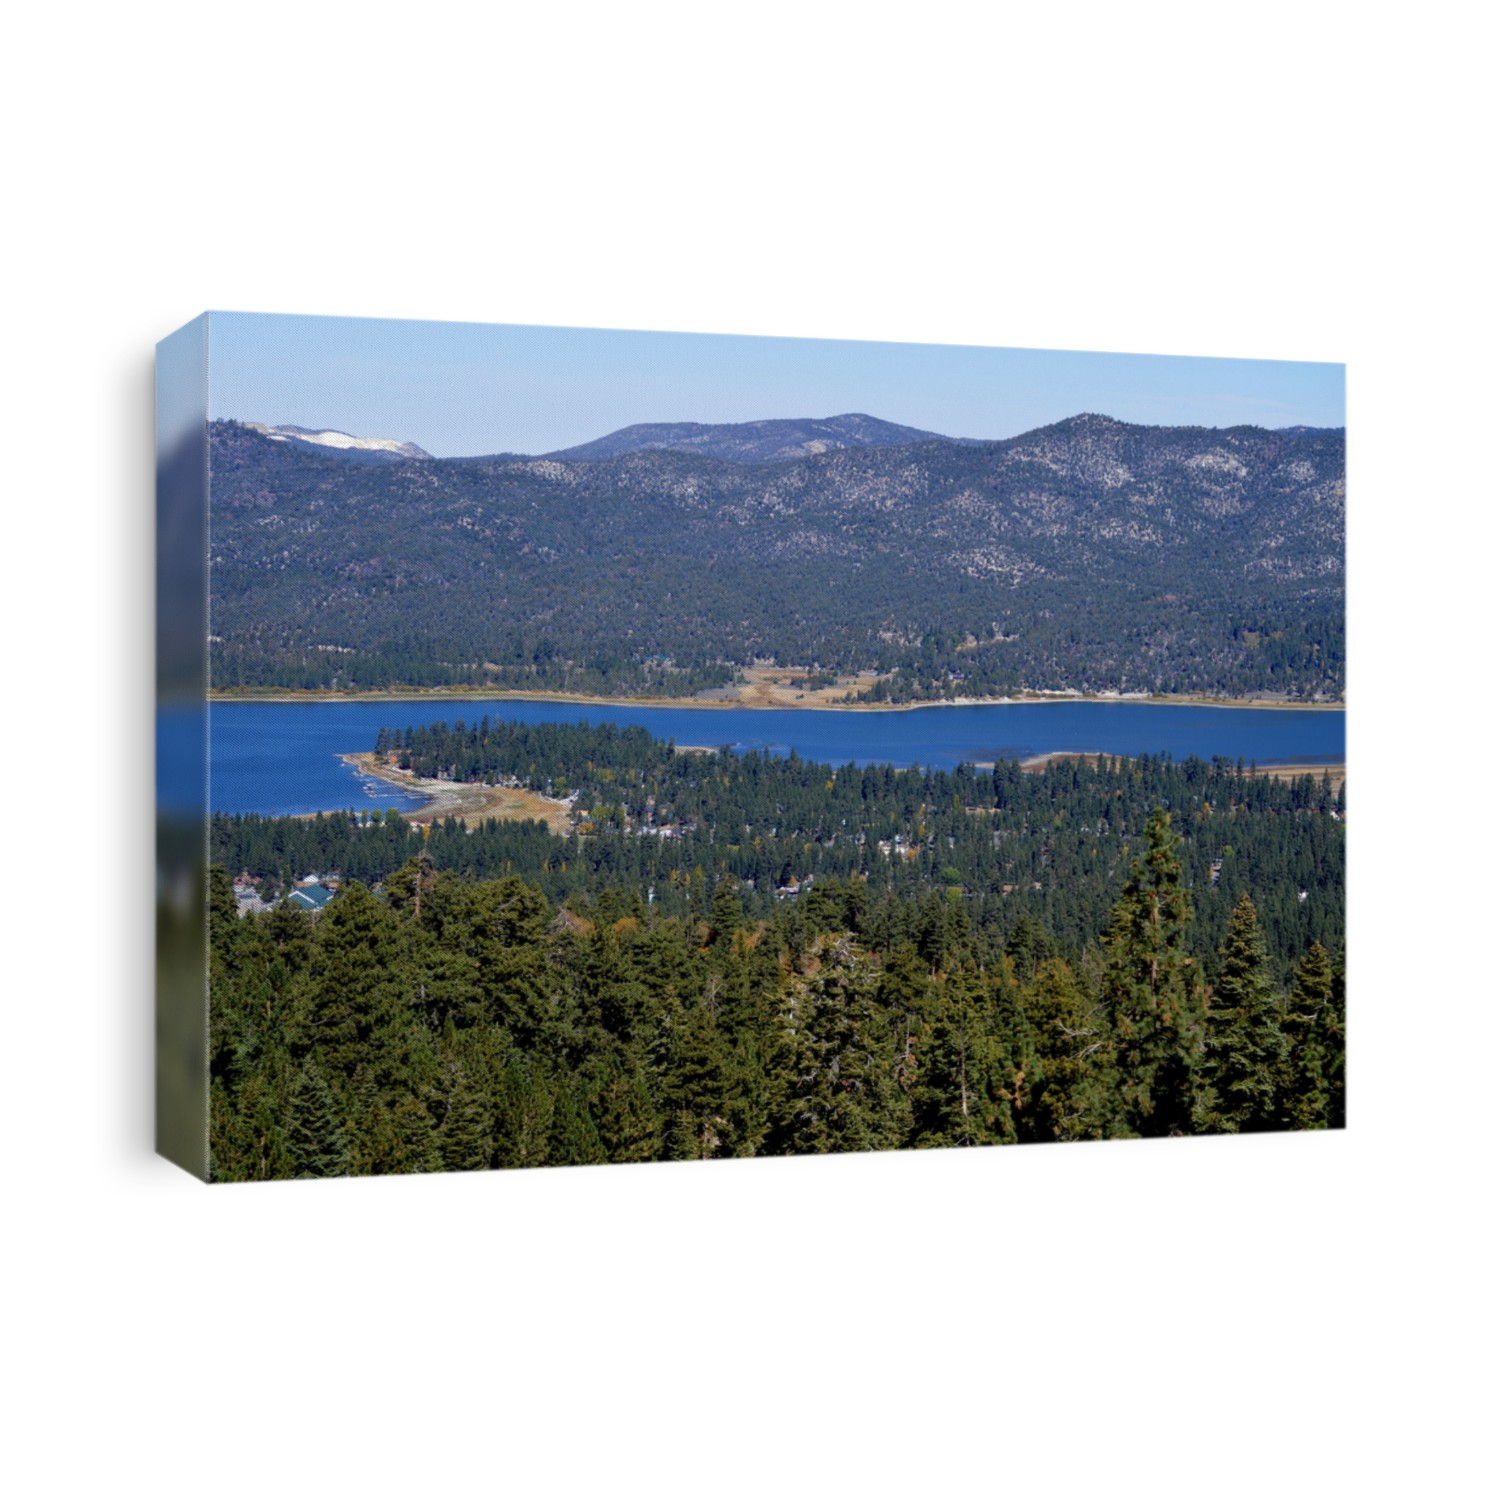  Scenic view of Big Bear Lake from the top of Snow Summit mountain. California.